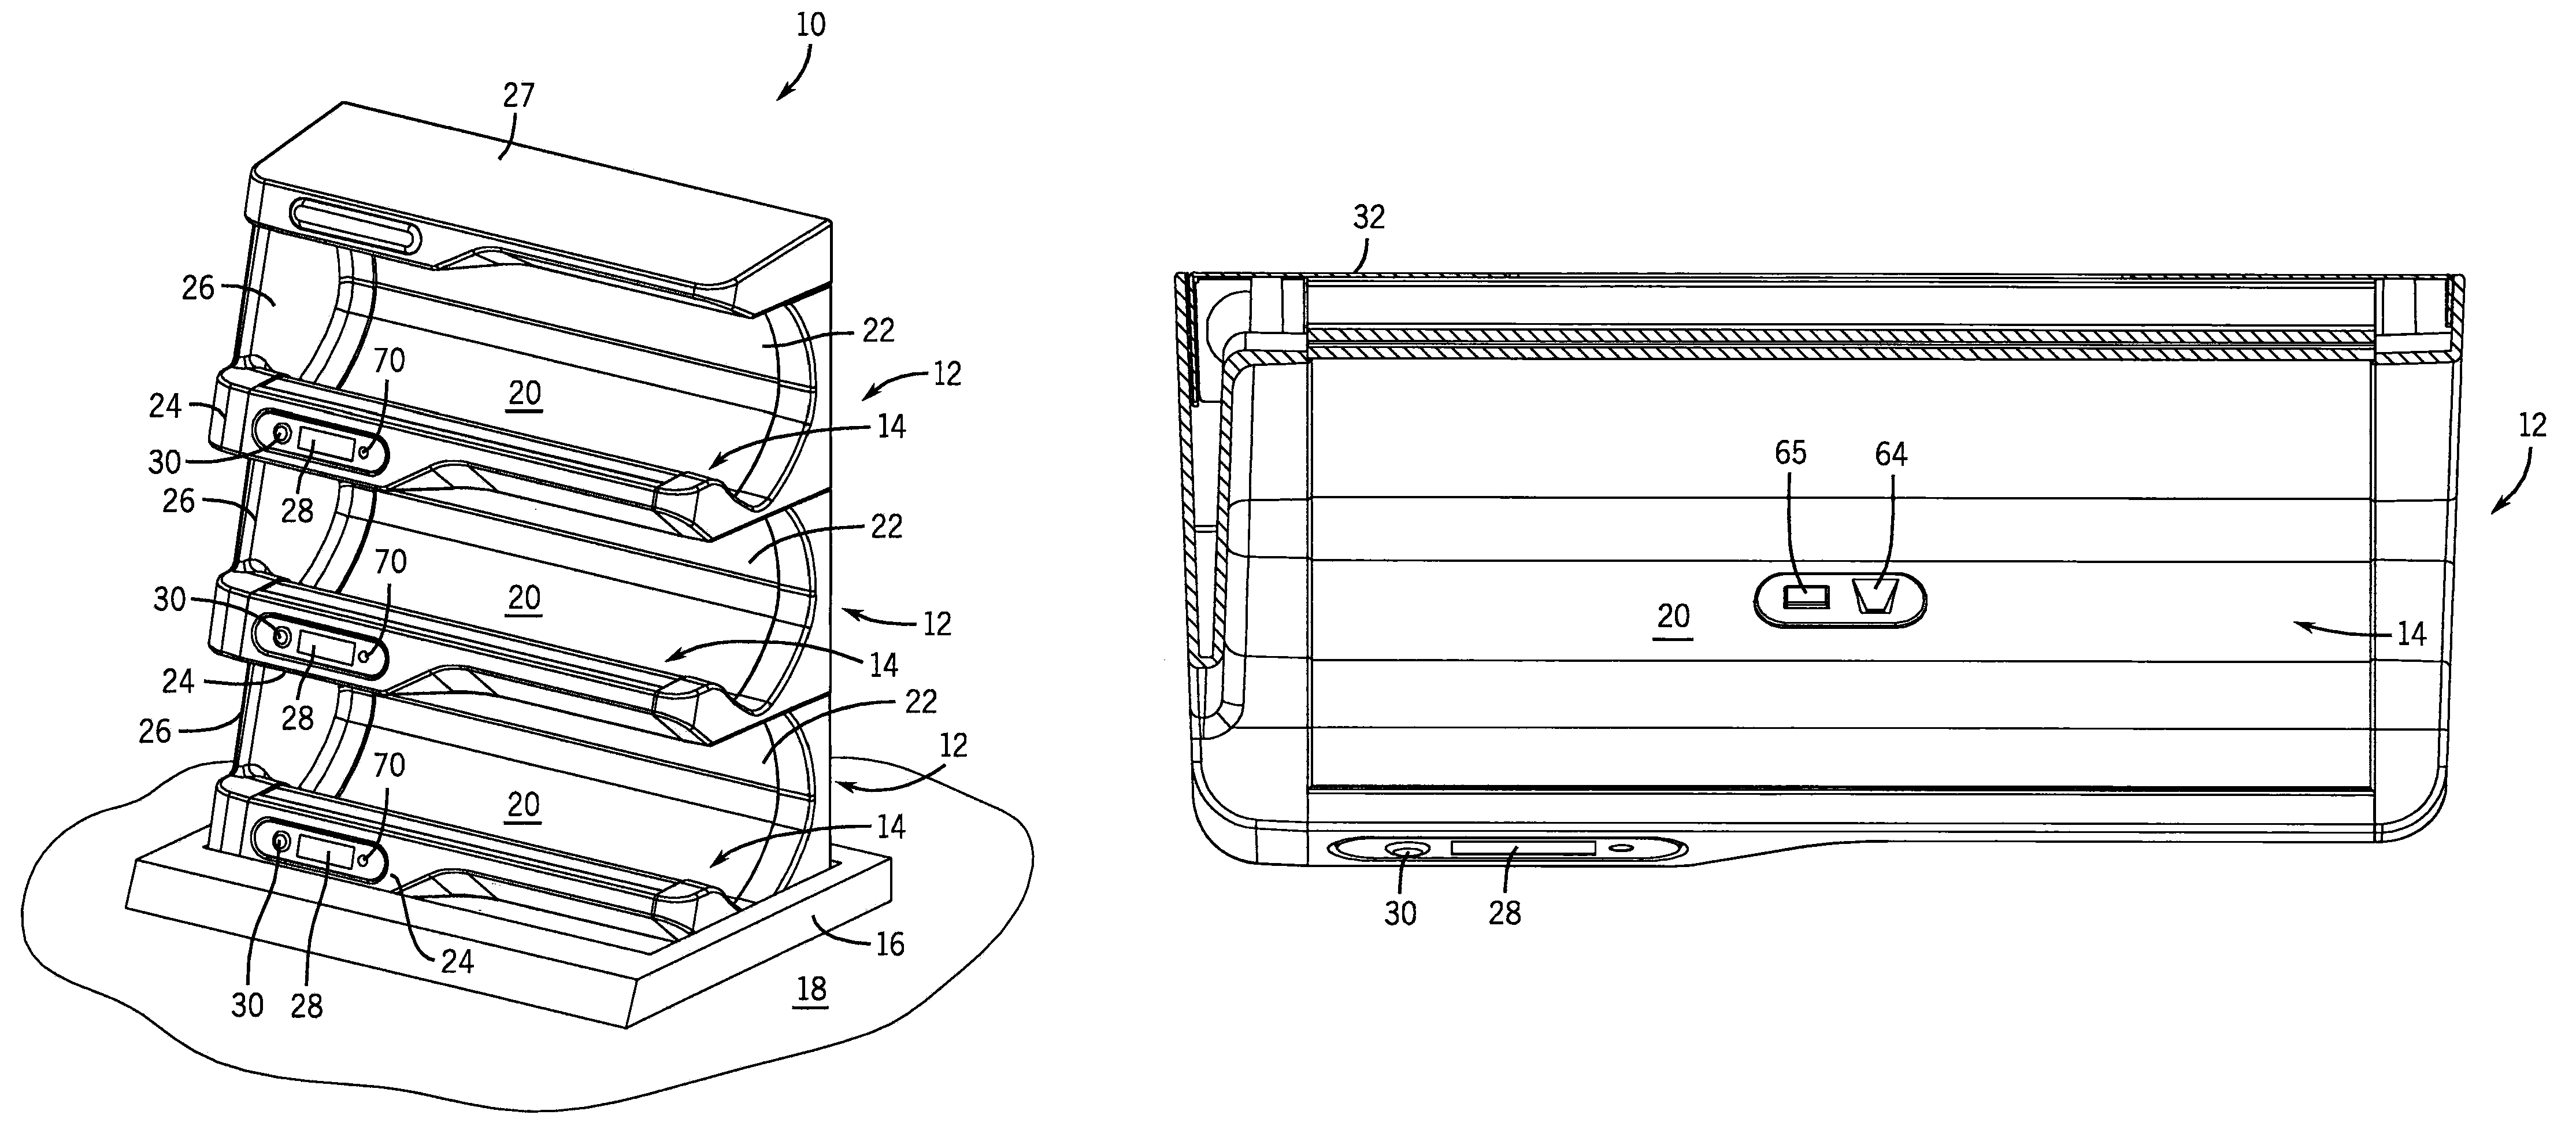 Fluid warmer with switch assembly